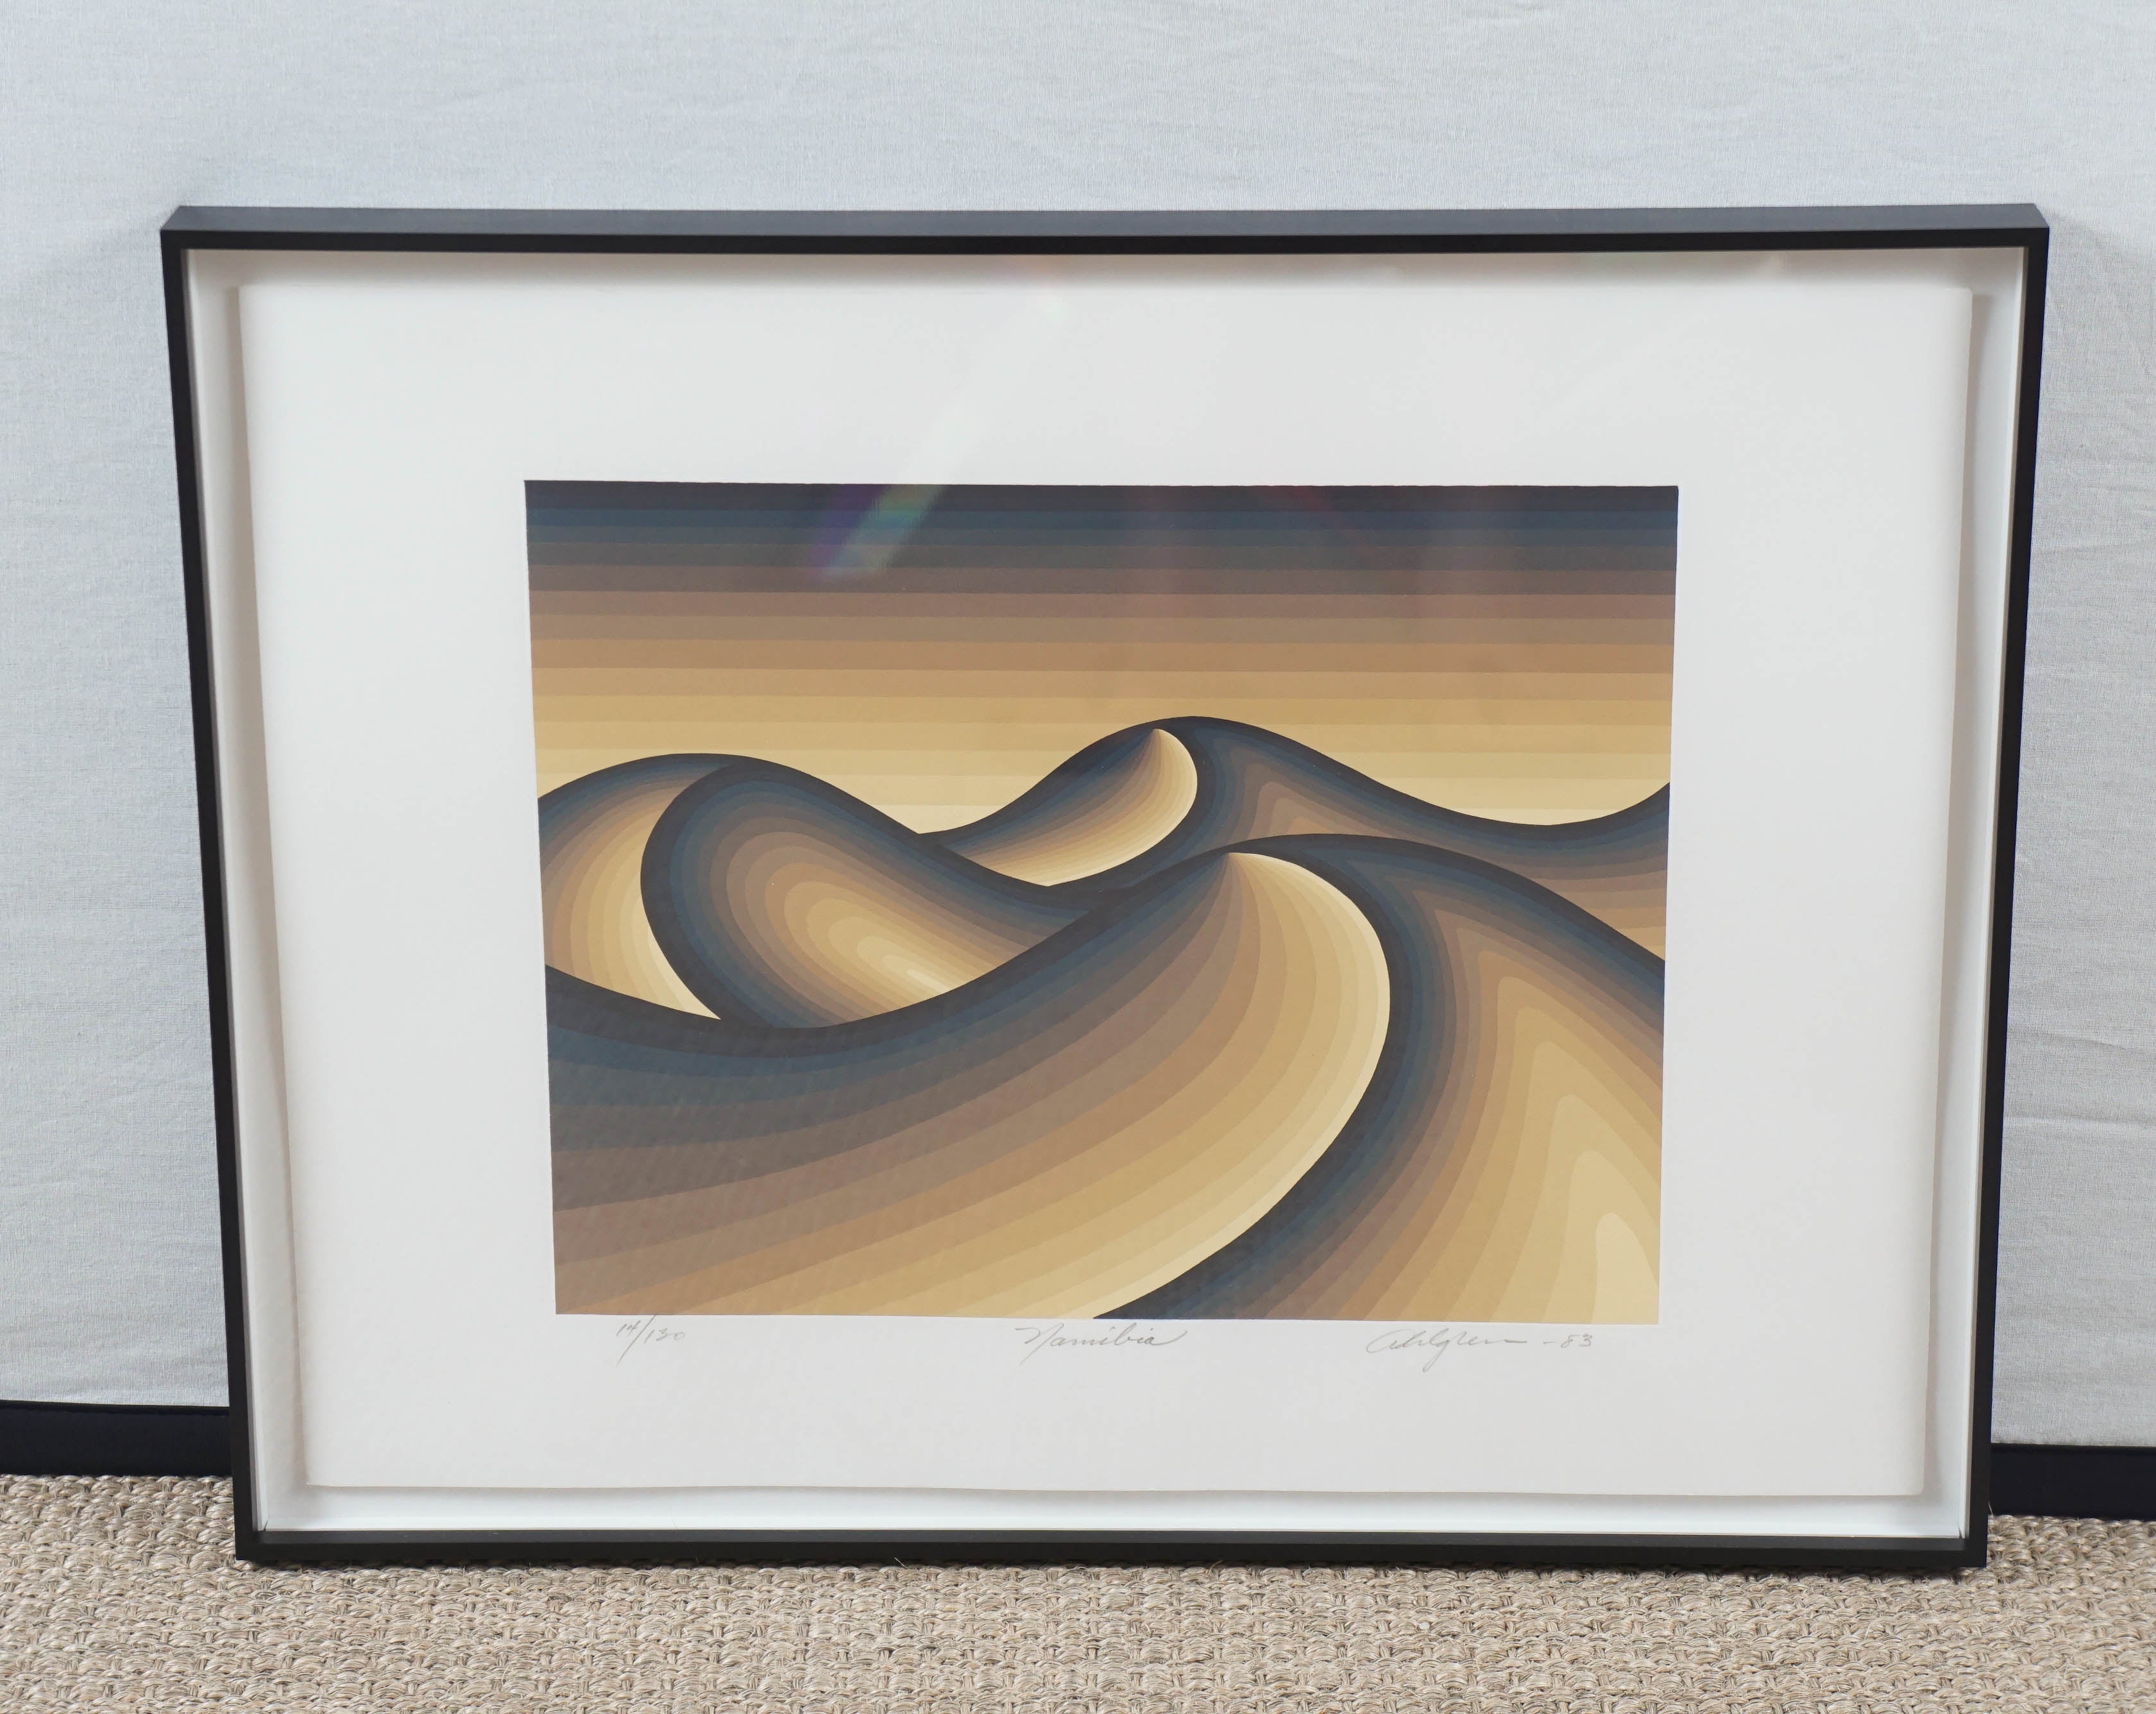 Here is an original silkscreen of waves by Roy B Ahlgren entitled Namibia.
Signed and numbered by the artist 14 of 130 and dated 1983. This work on paper has been recently framed in a black iron shadow box. The image size is 13.5 by 10.5 inches on